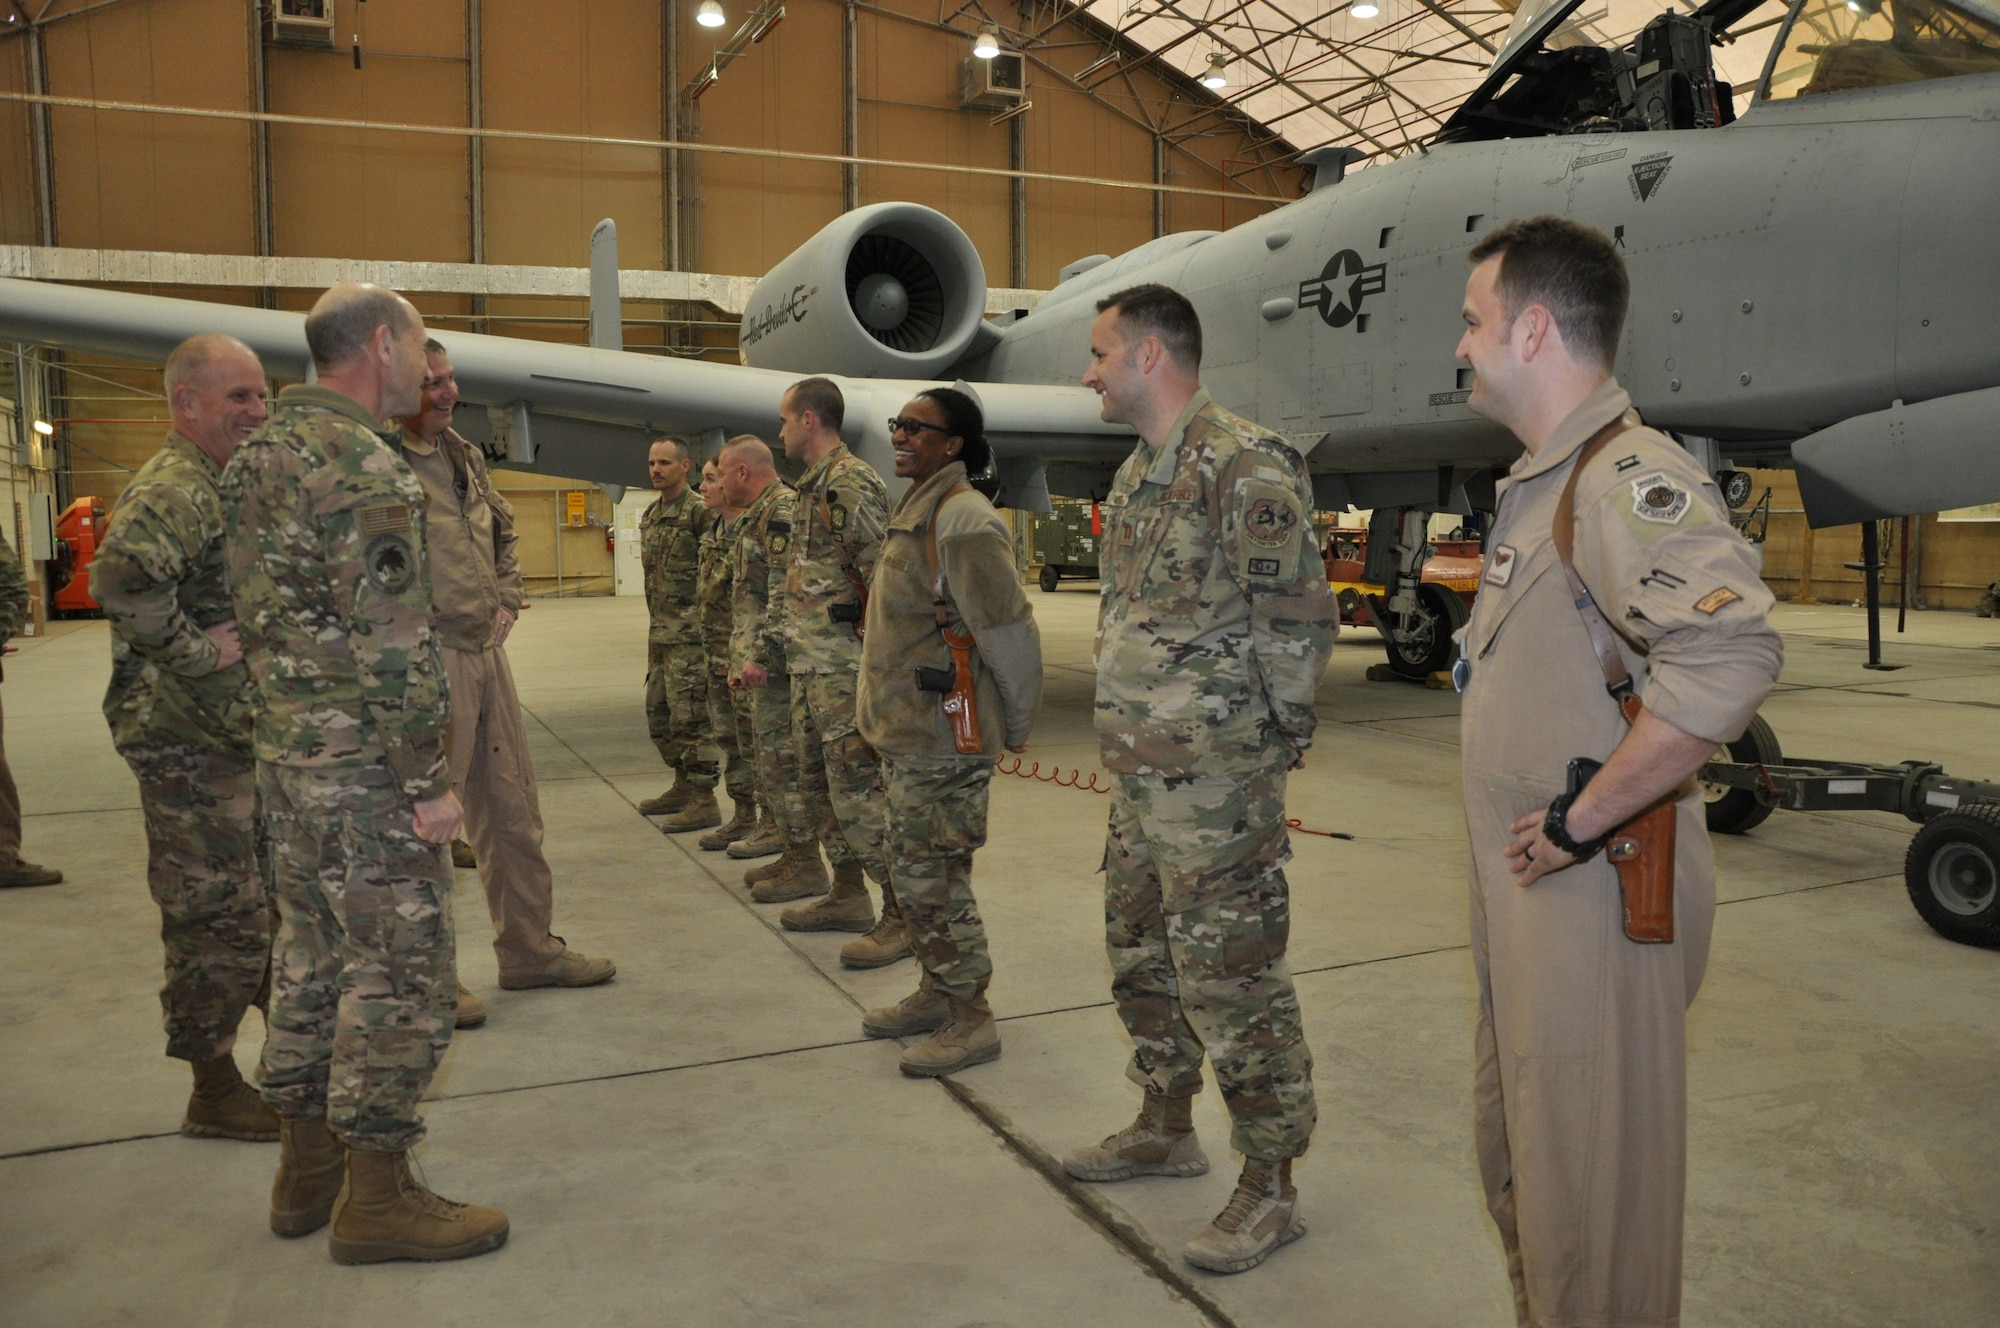 Gen. Mike Holmes, commander of Air Combat Command, and Chief Master Sgt. Frank H. Batten III, ACC command chief master sergeant, meet Airmen from the 75th Expeditionary Fighter Squadron at Kandahar Airfield, Afghanistan, Feb. 13, 2019.